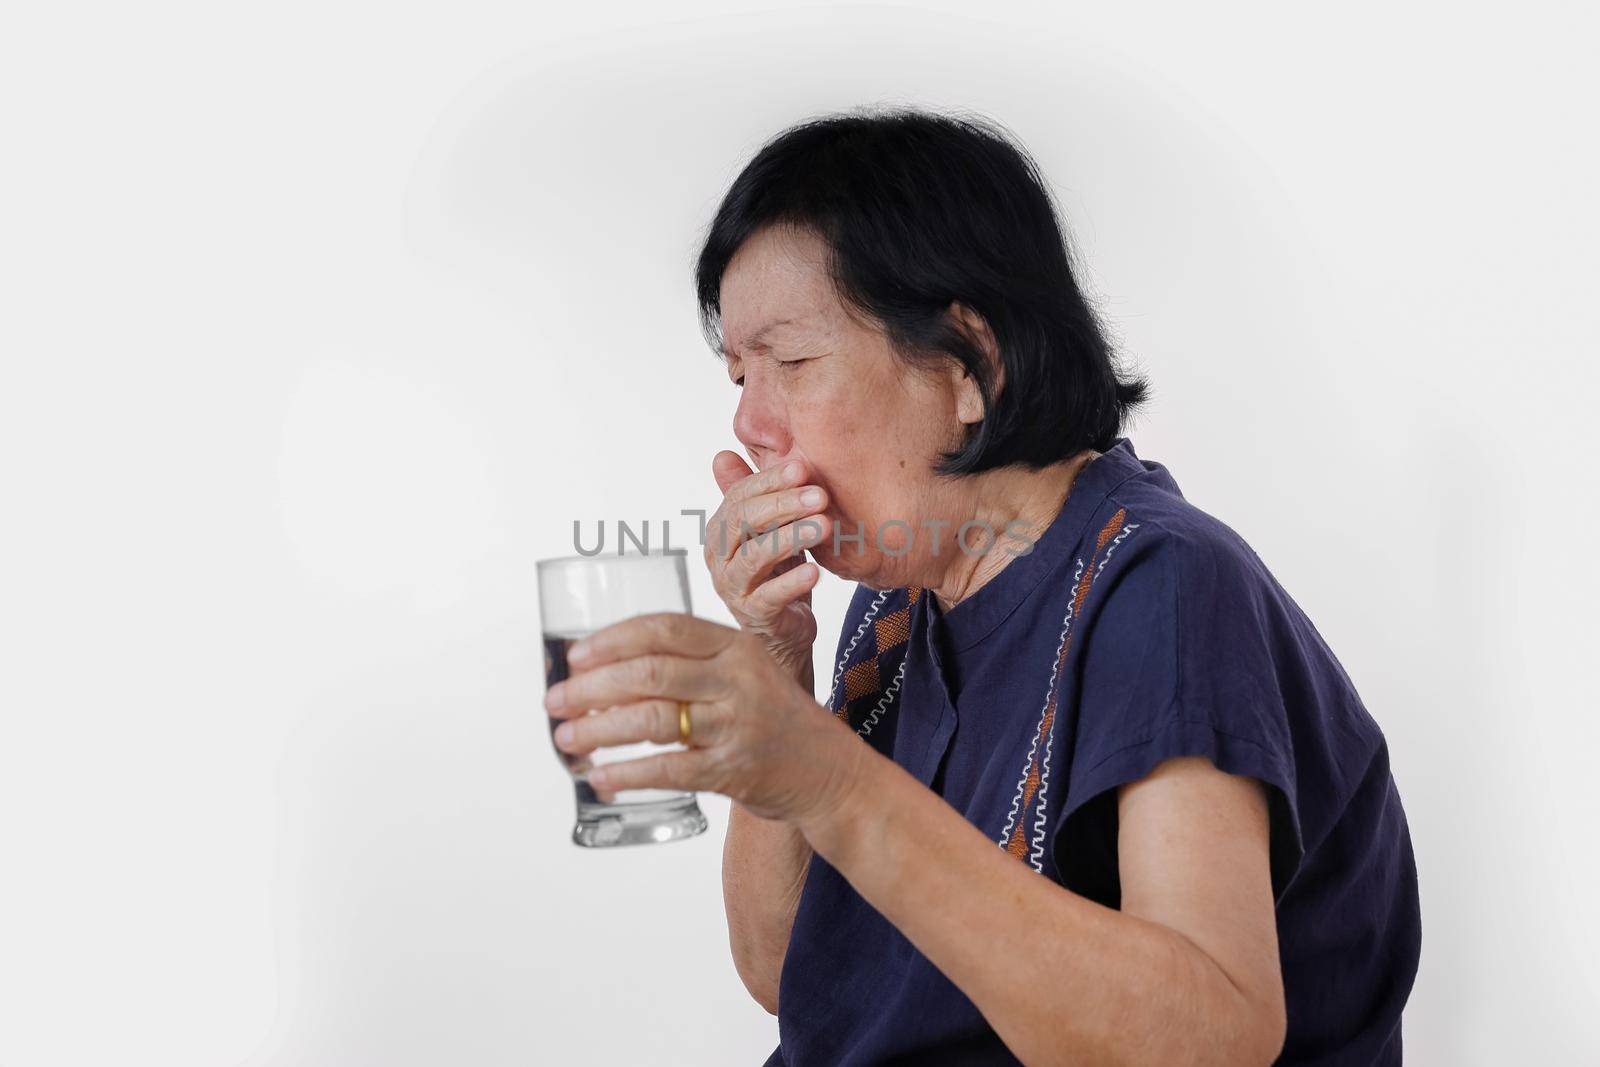 elderly woman Choking a water drink after take  medicine ,isolated on white background. by toa55